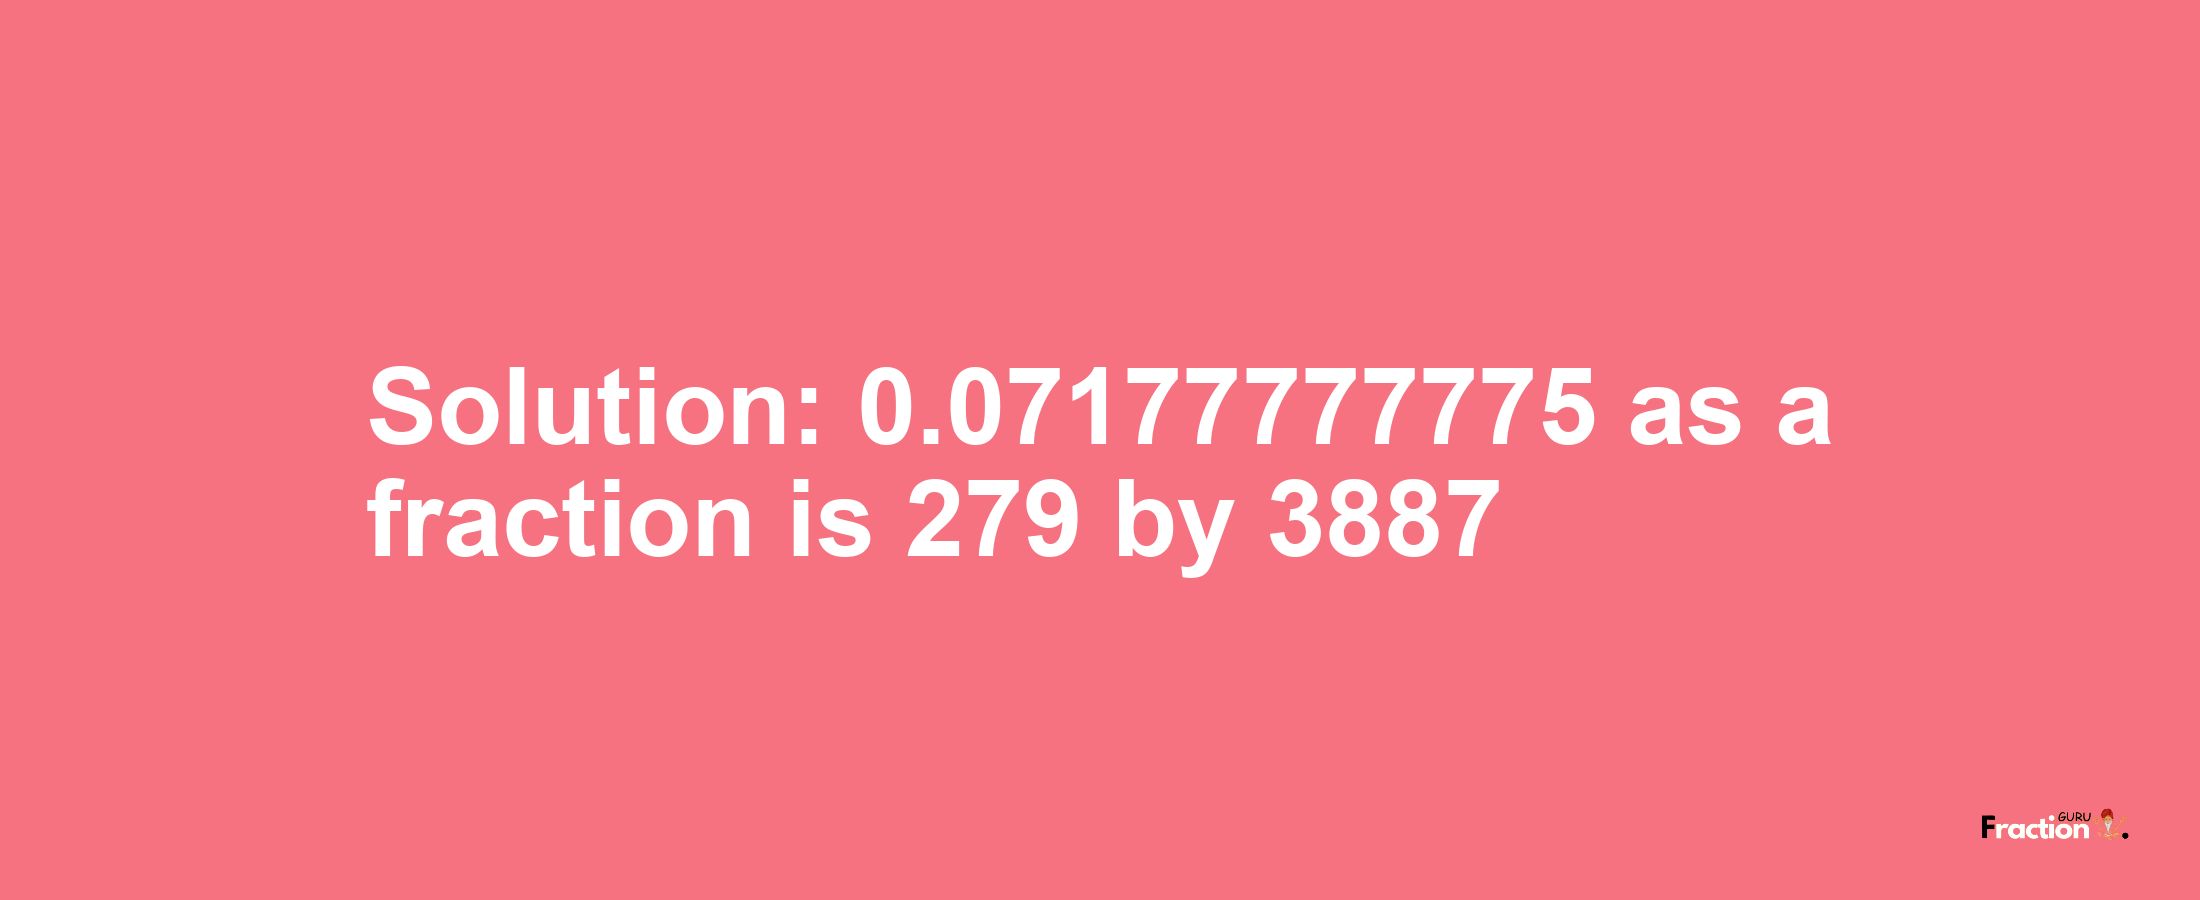 Solution:0.07177777775 as a fraction is 279/3887